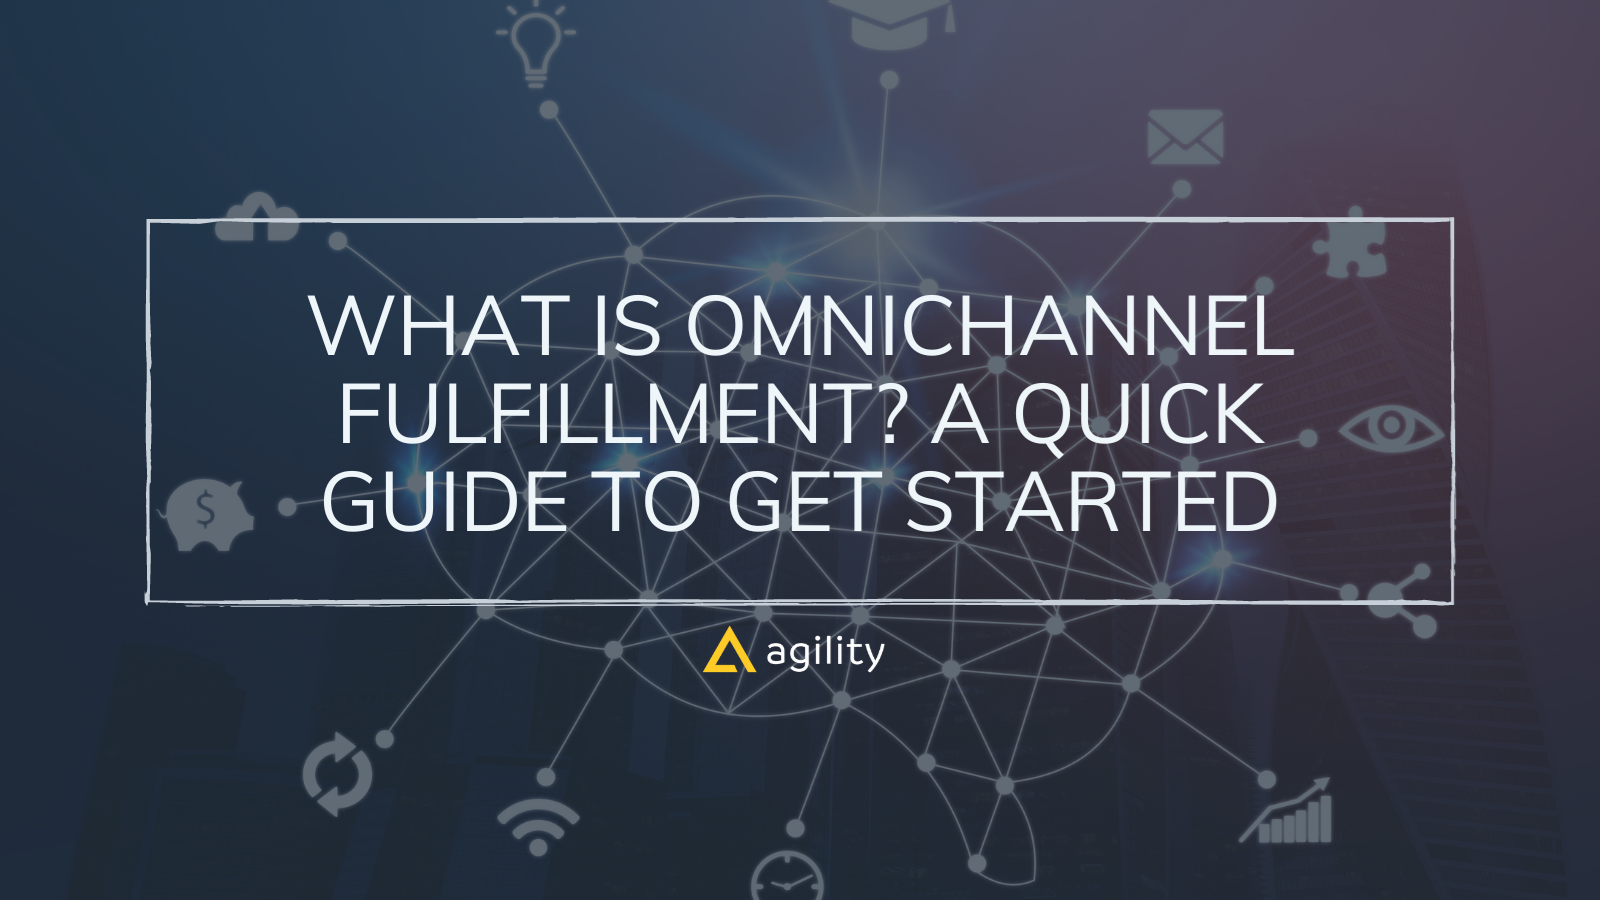 What Is Omnichannel Fulfillment? A Quick Guide to Get Started